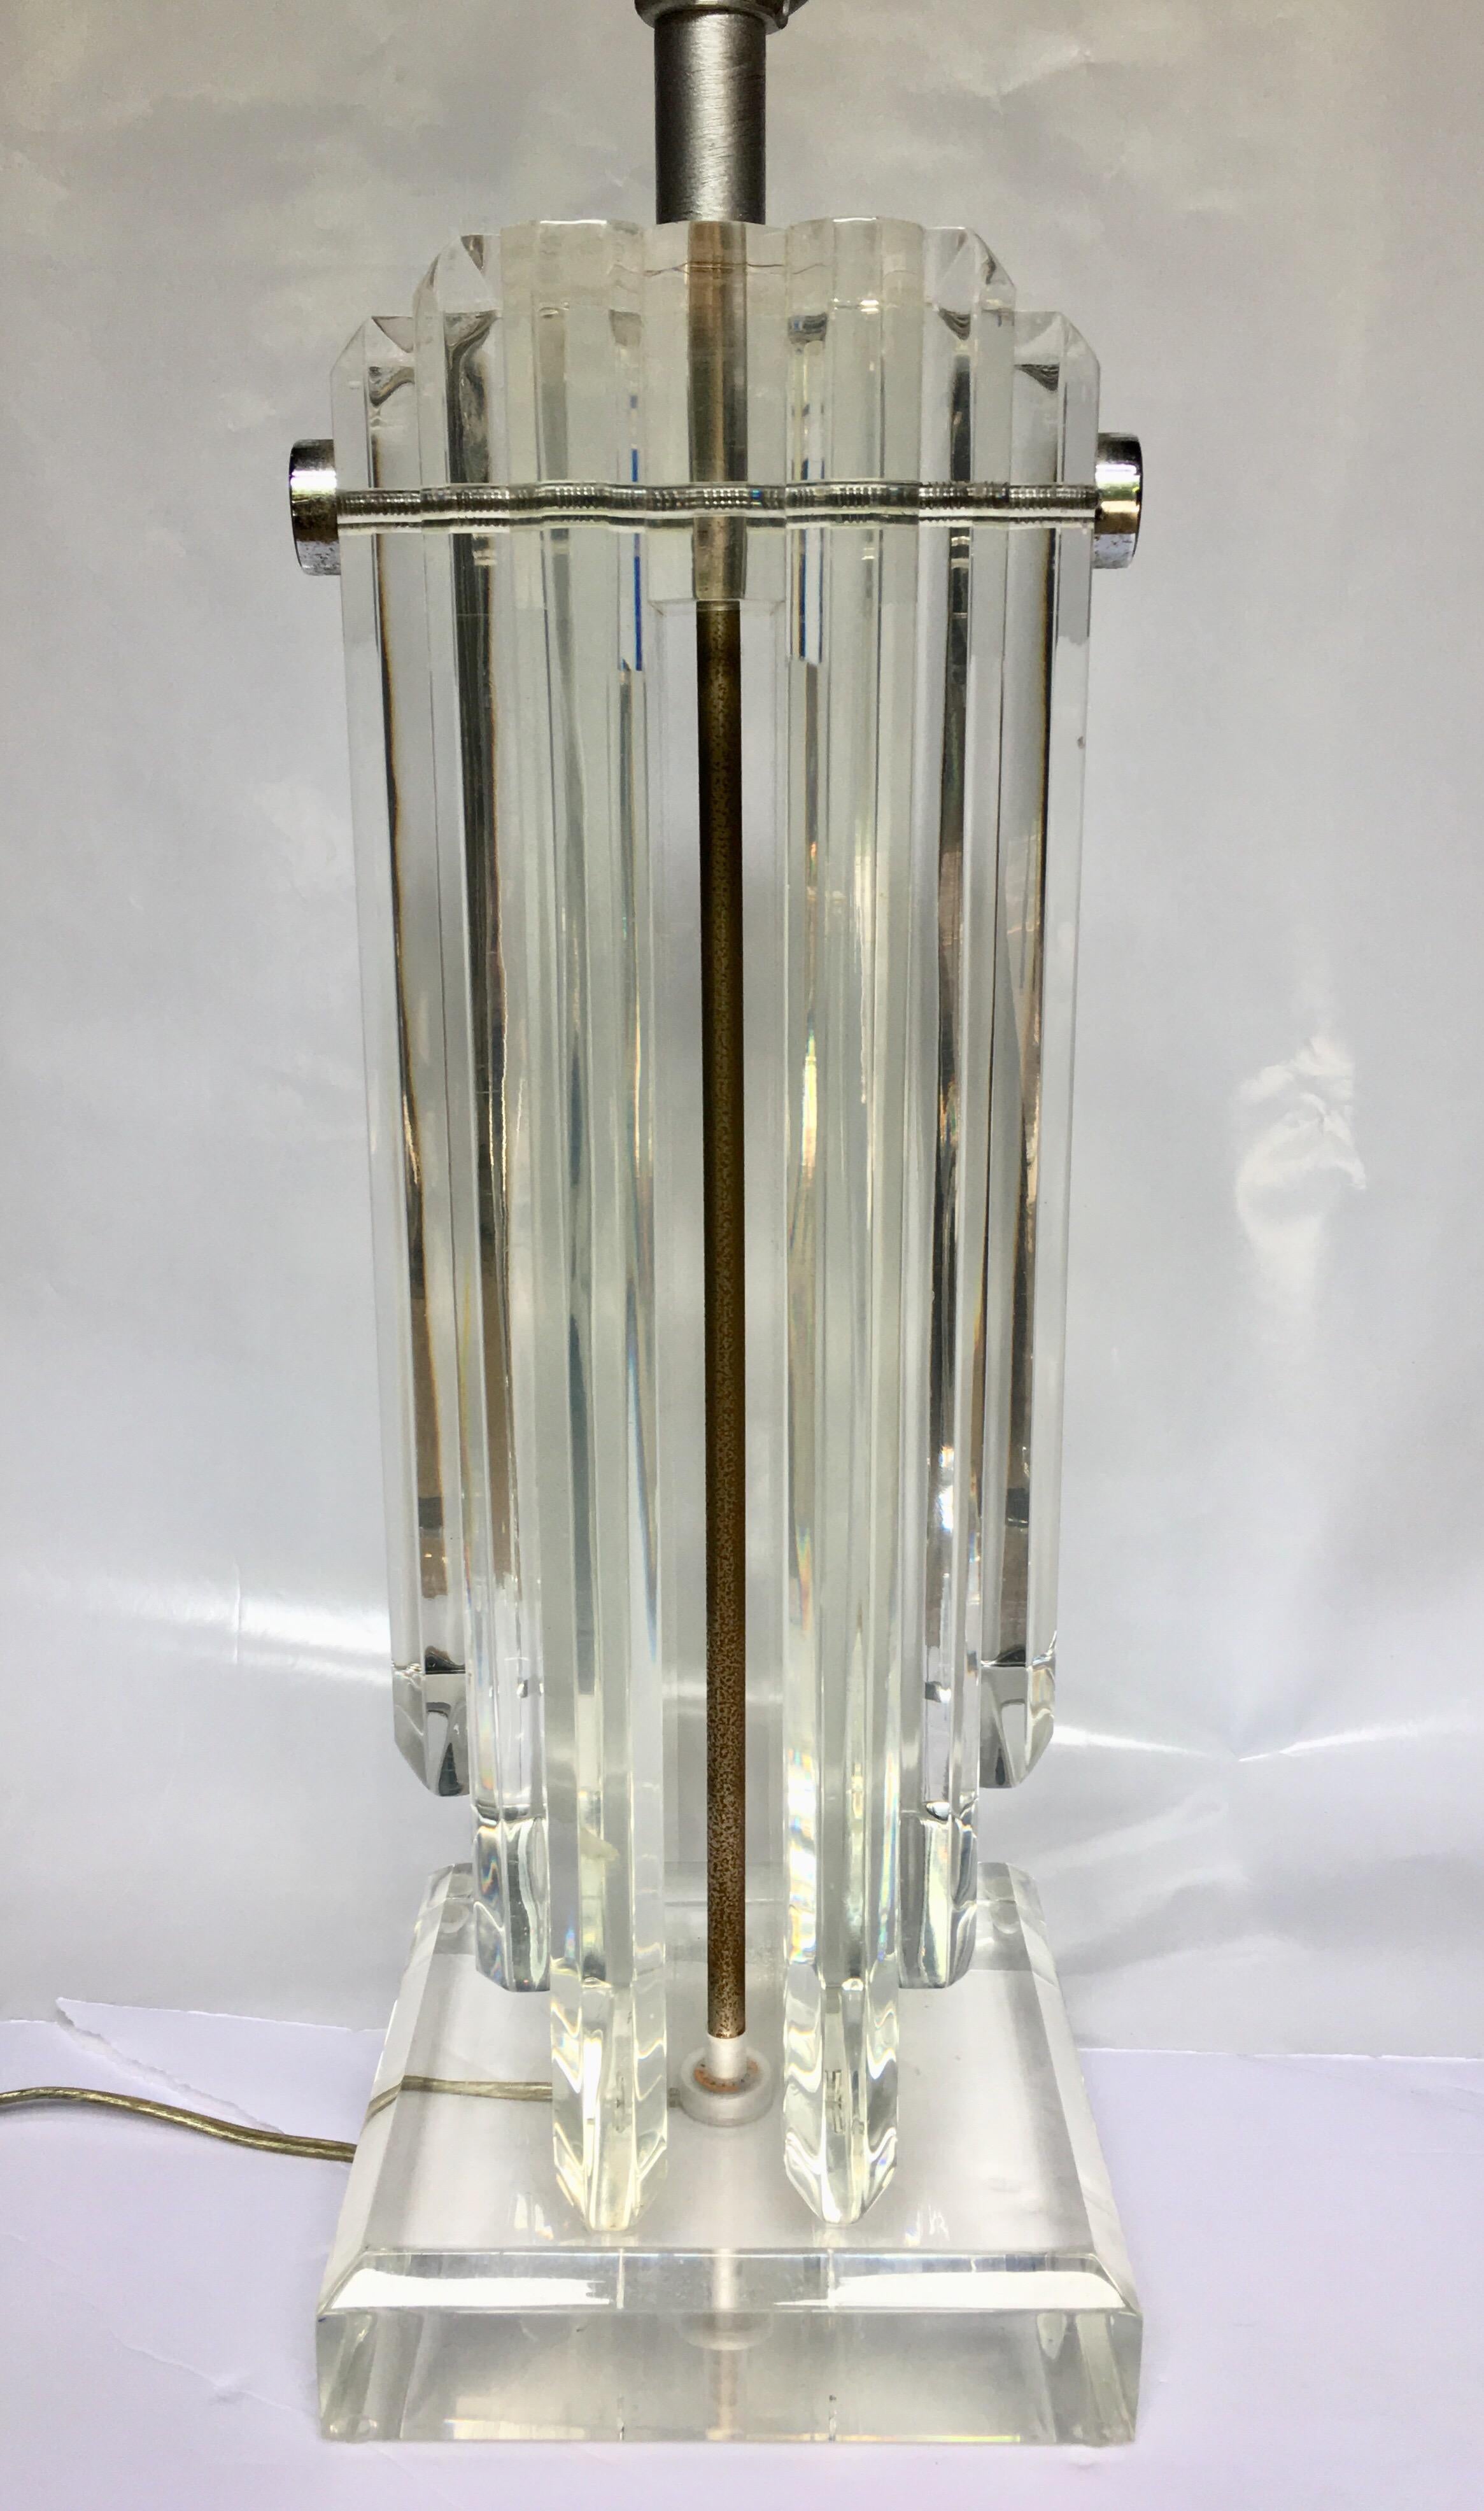 Large Hollywood Regency style Lucite table lamp featuring thick heavy stacked clear Lucite panels held together with tubular chrome rods. Lucite finial and harp included. Lamp shade not included. 

30 inches high to harp.
22.5 inches high to socket.